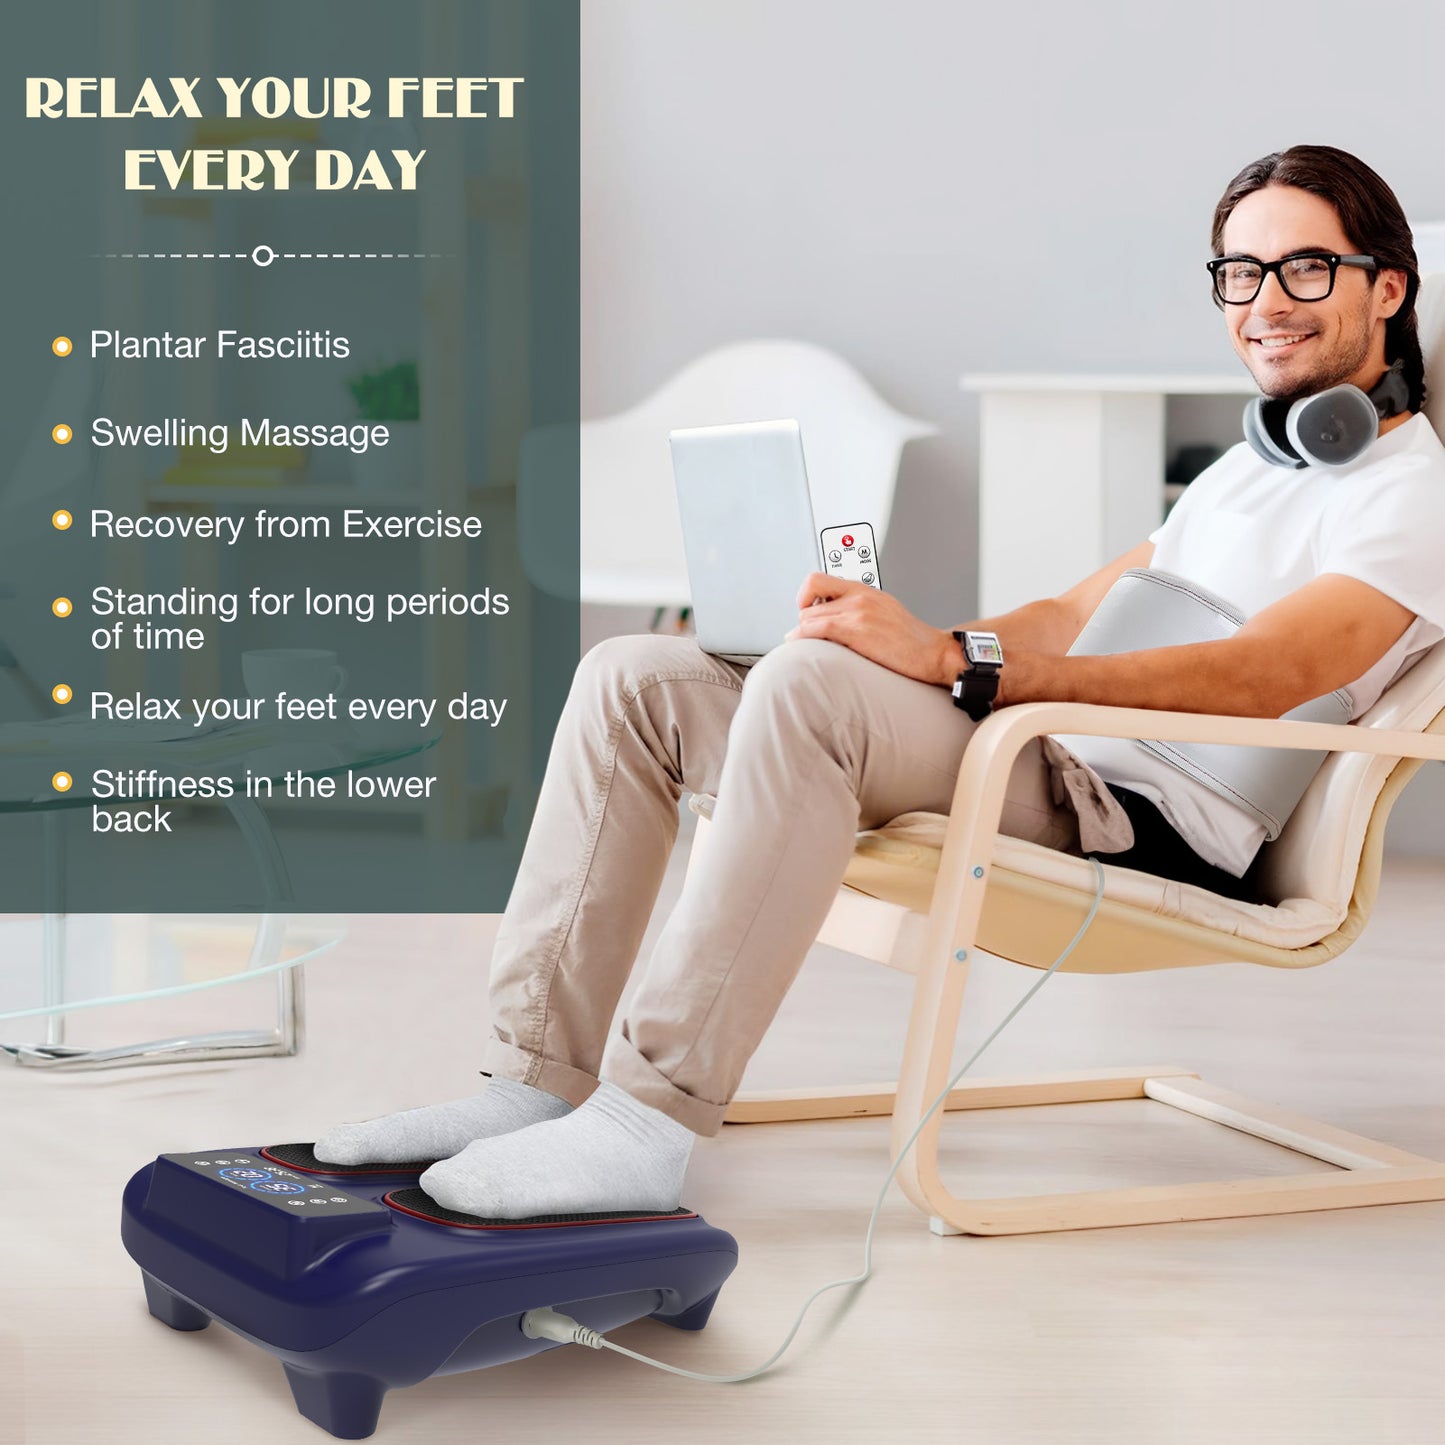 Foot Massager Machine with Heat, Vibration Foot Massager, 2 Speed Adjustable, 2 Shiatsu Deep Kneading for Pain Relief, at Home Use